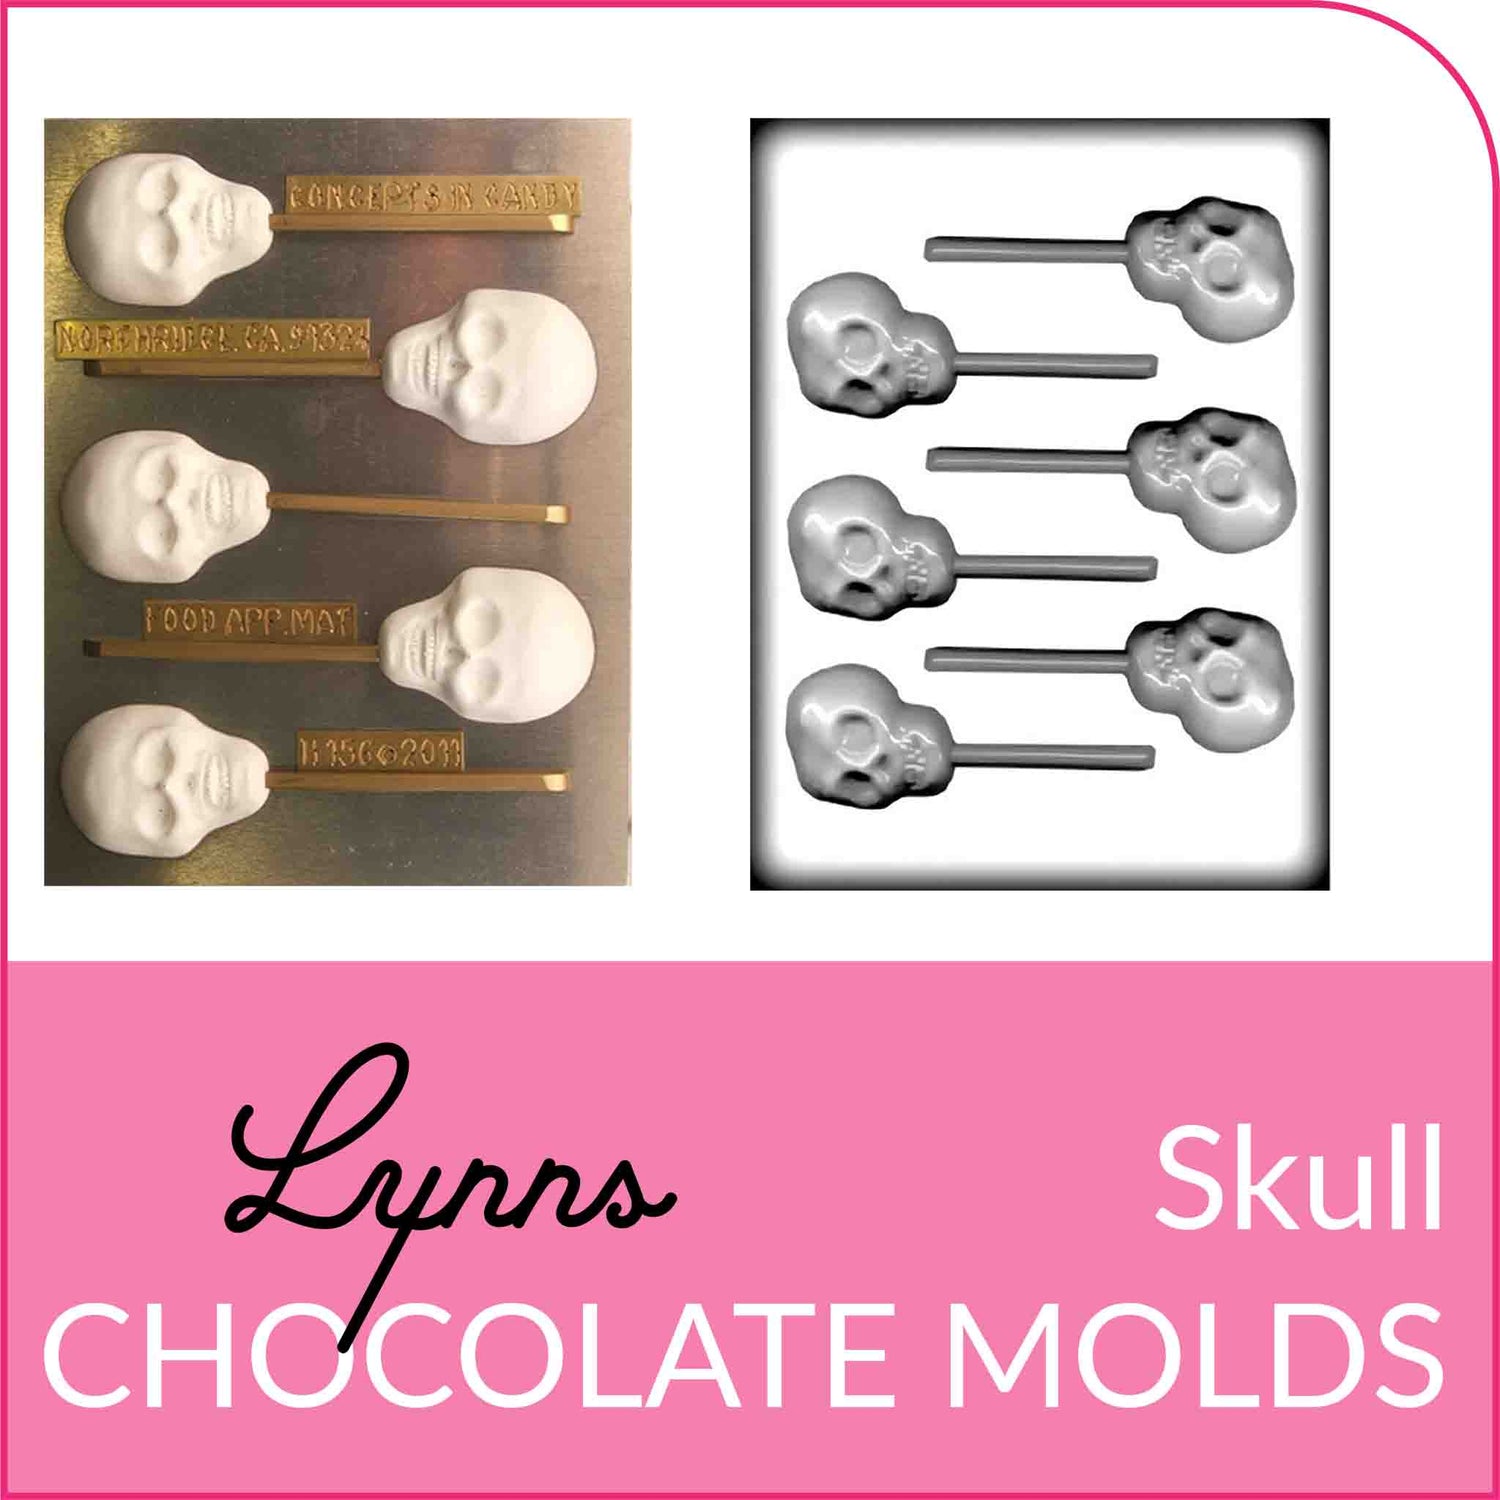 Shop Skull Chocolate Molds from Lynn's